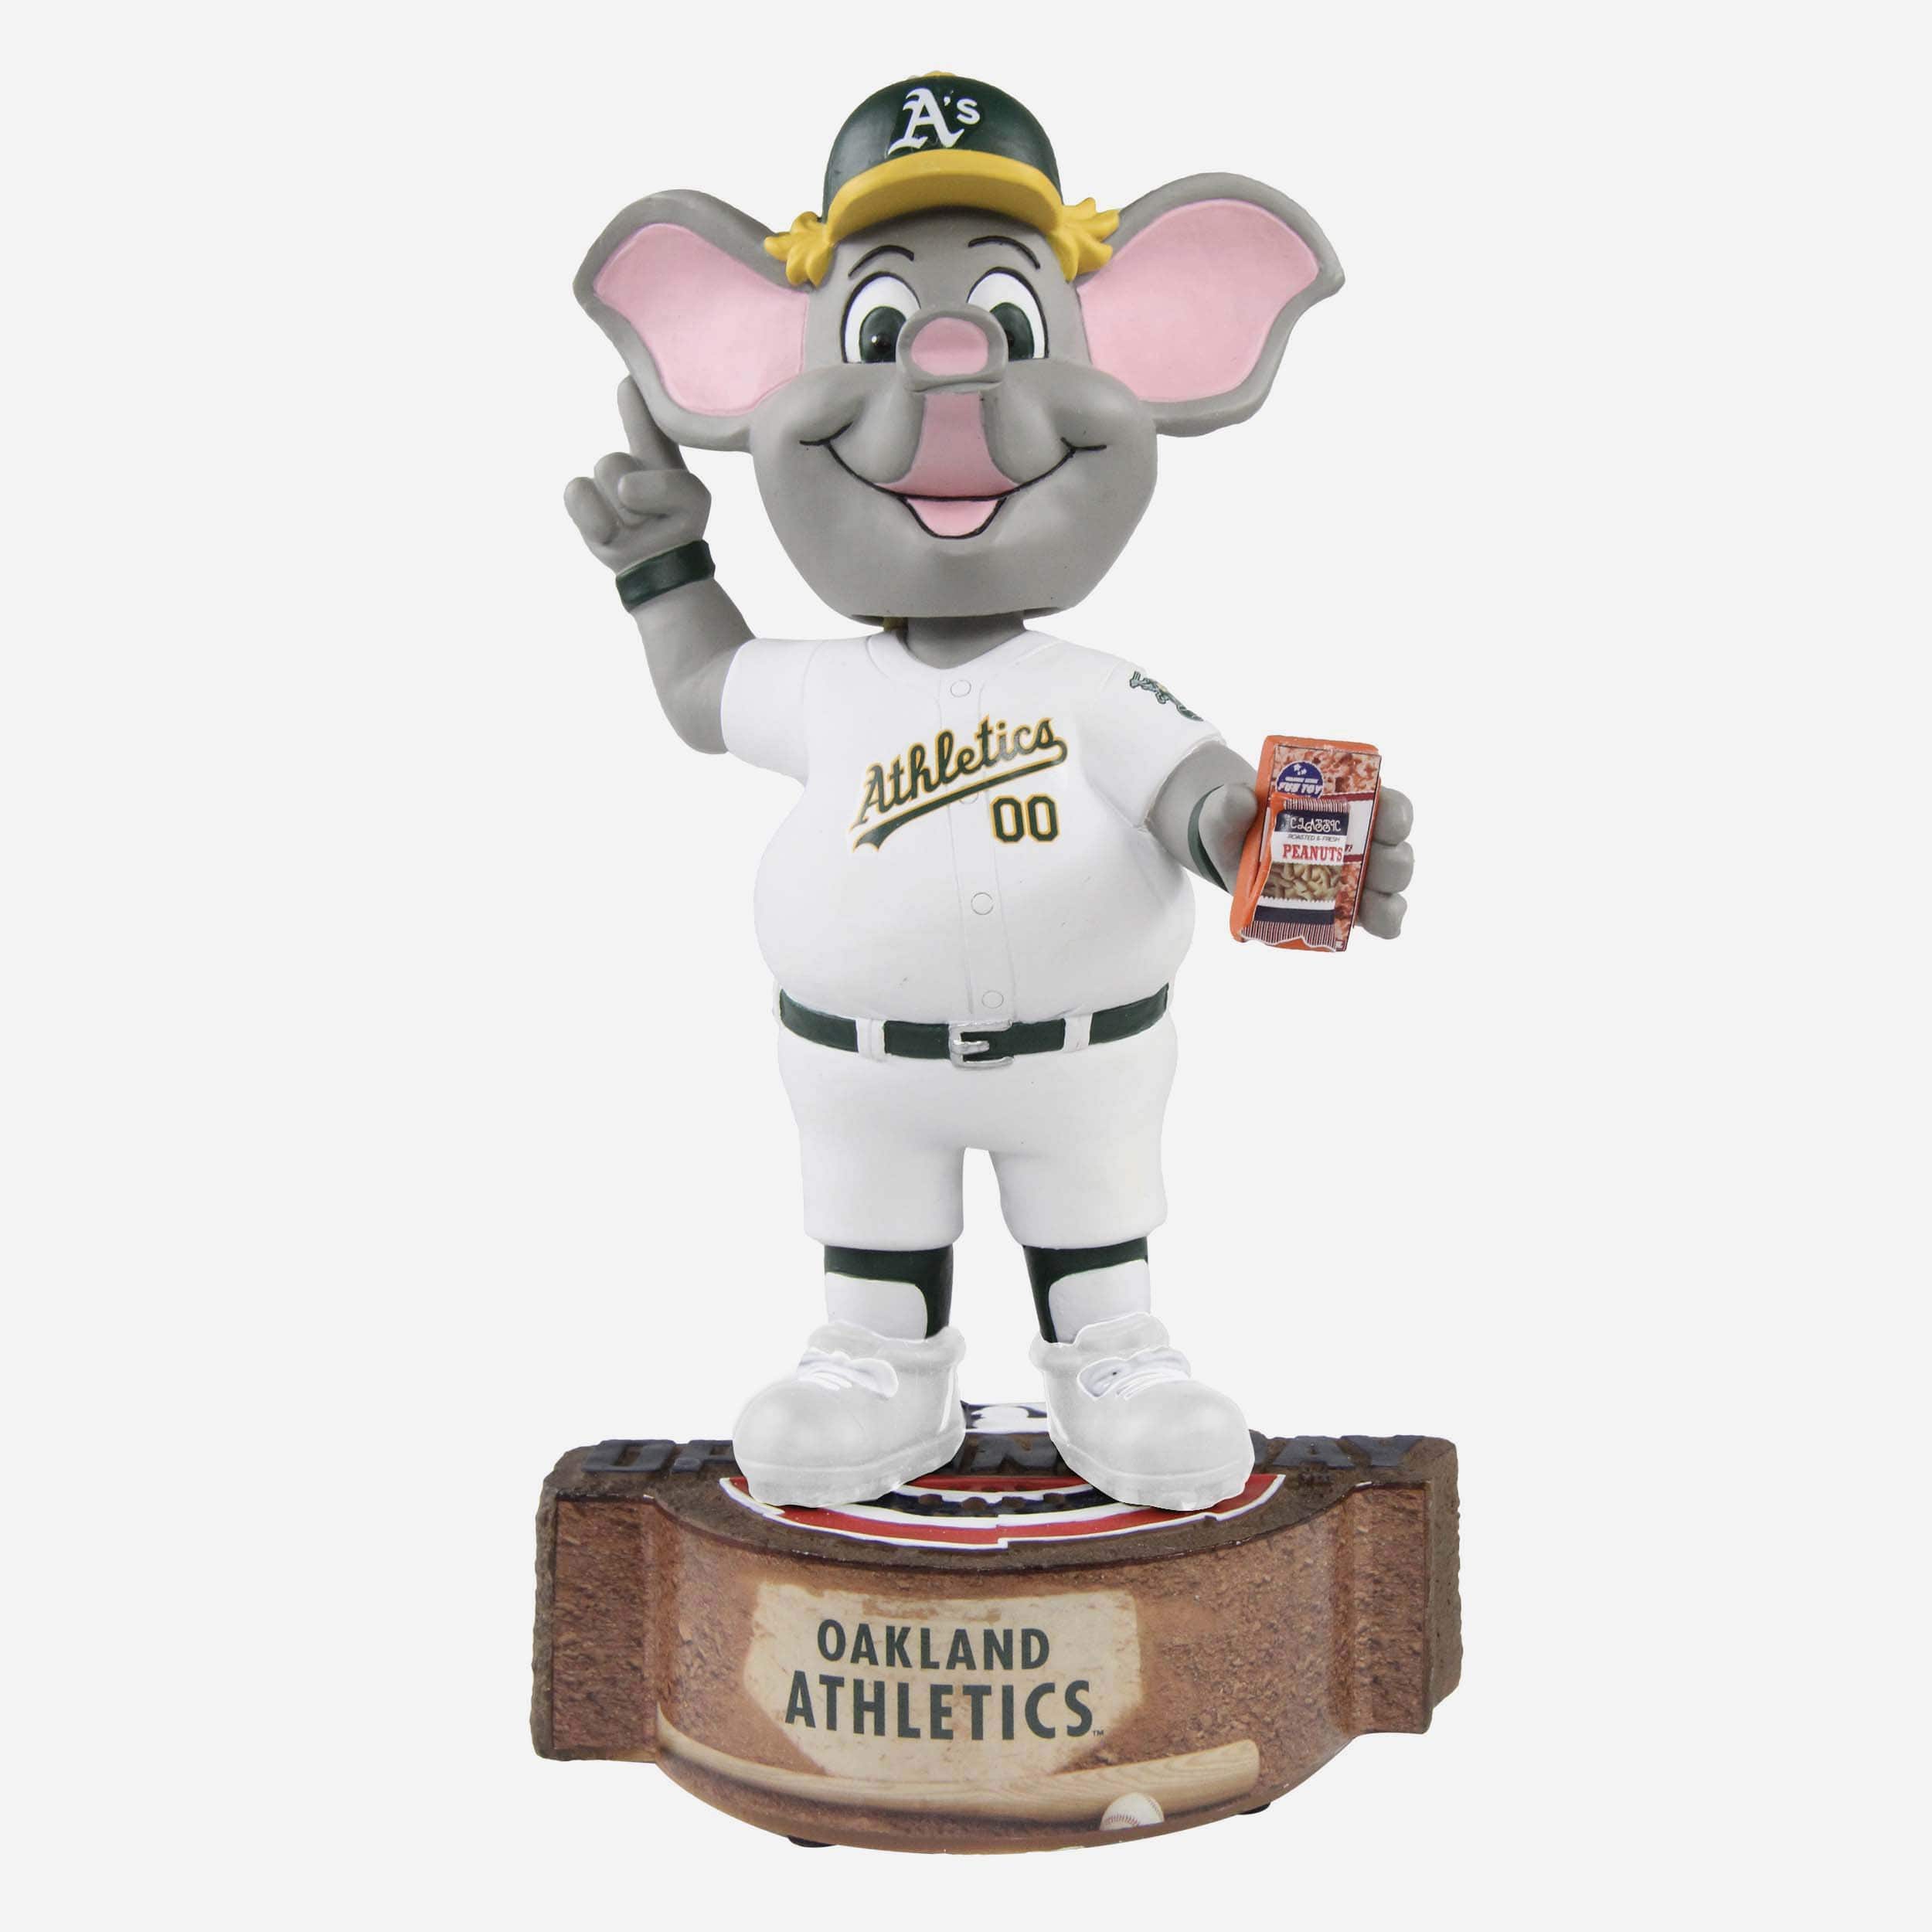 Stomper Oakland Athletics Opening Day Mascot Bobblehead Officially Licensed by MLB